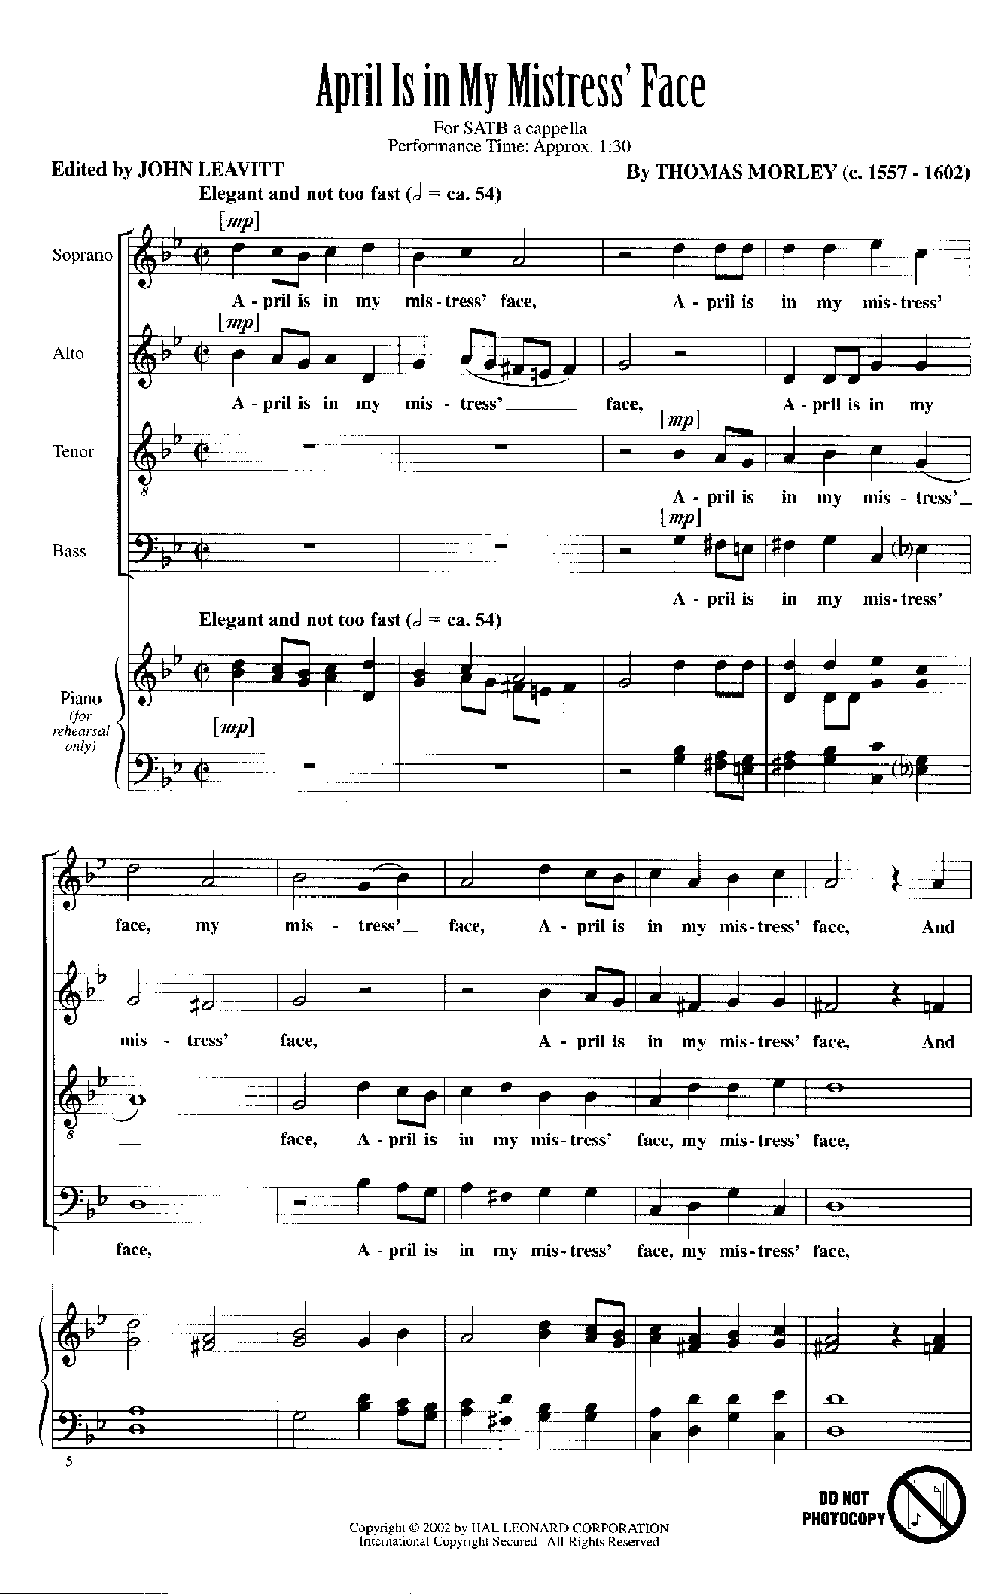 April Is in My Mistress' Face (SATB ) by Tho | J.W. Pepper Sheet Music